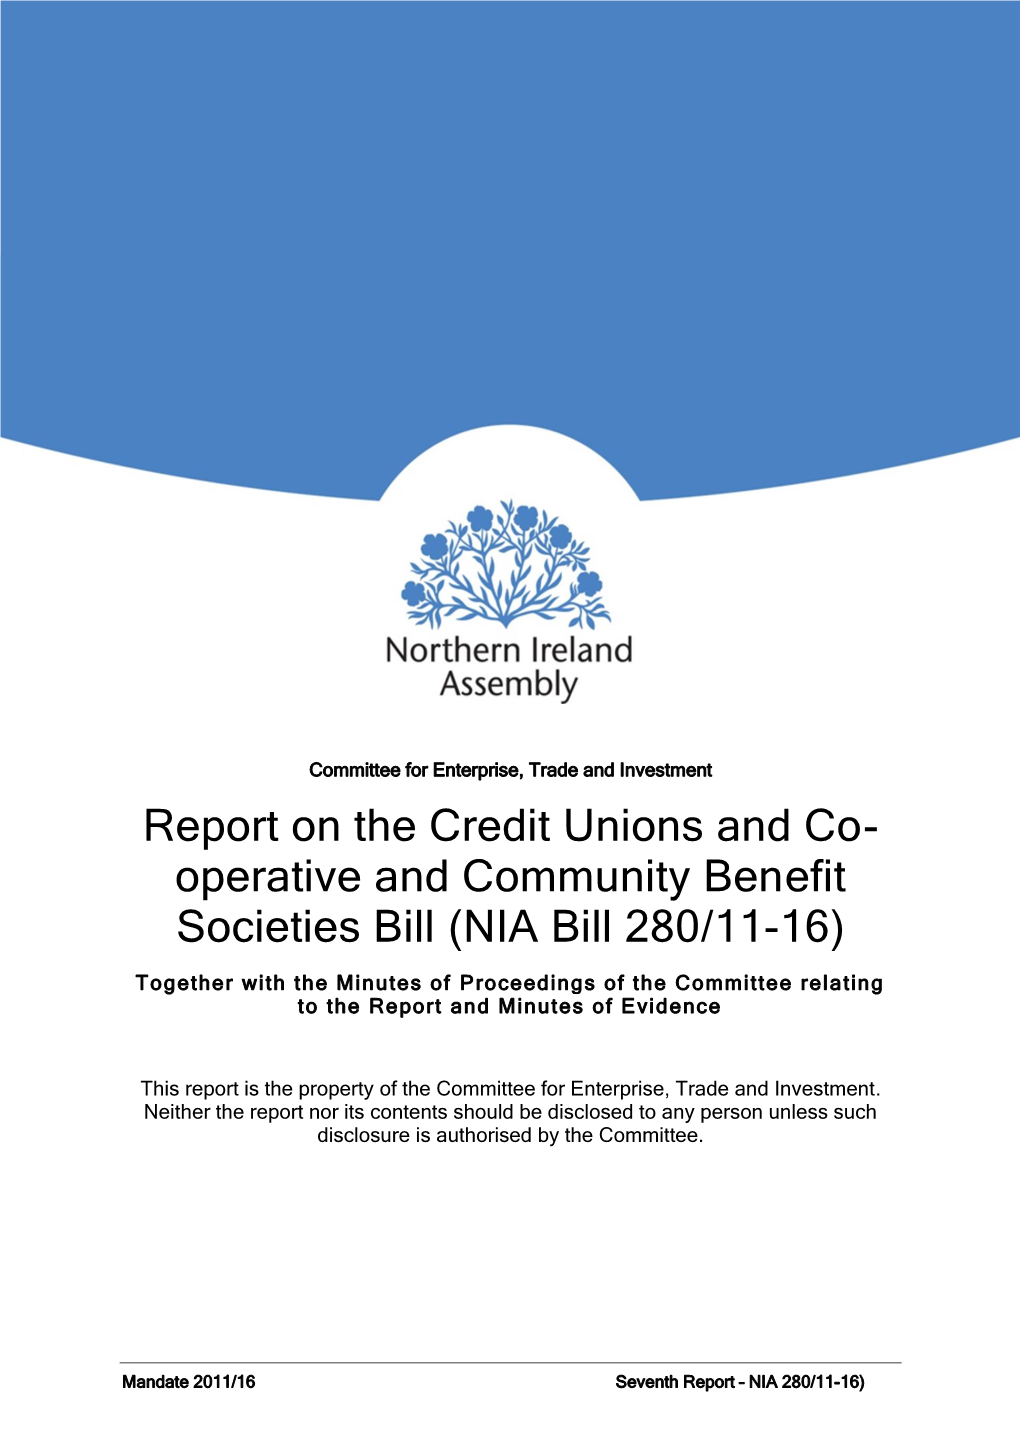 Report on the Credit Unions and Co- Operative and Community Benefit Societies Bill (NIA Bill 280/11-16)